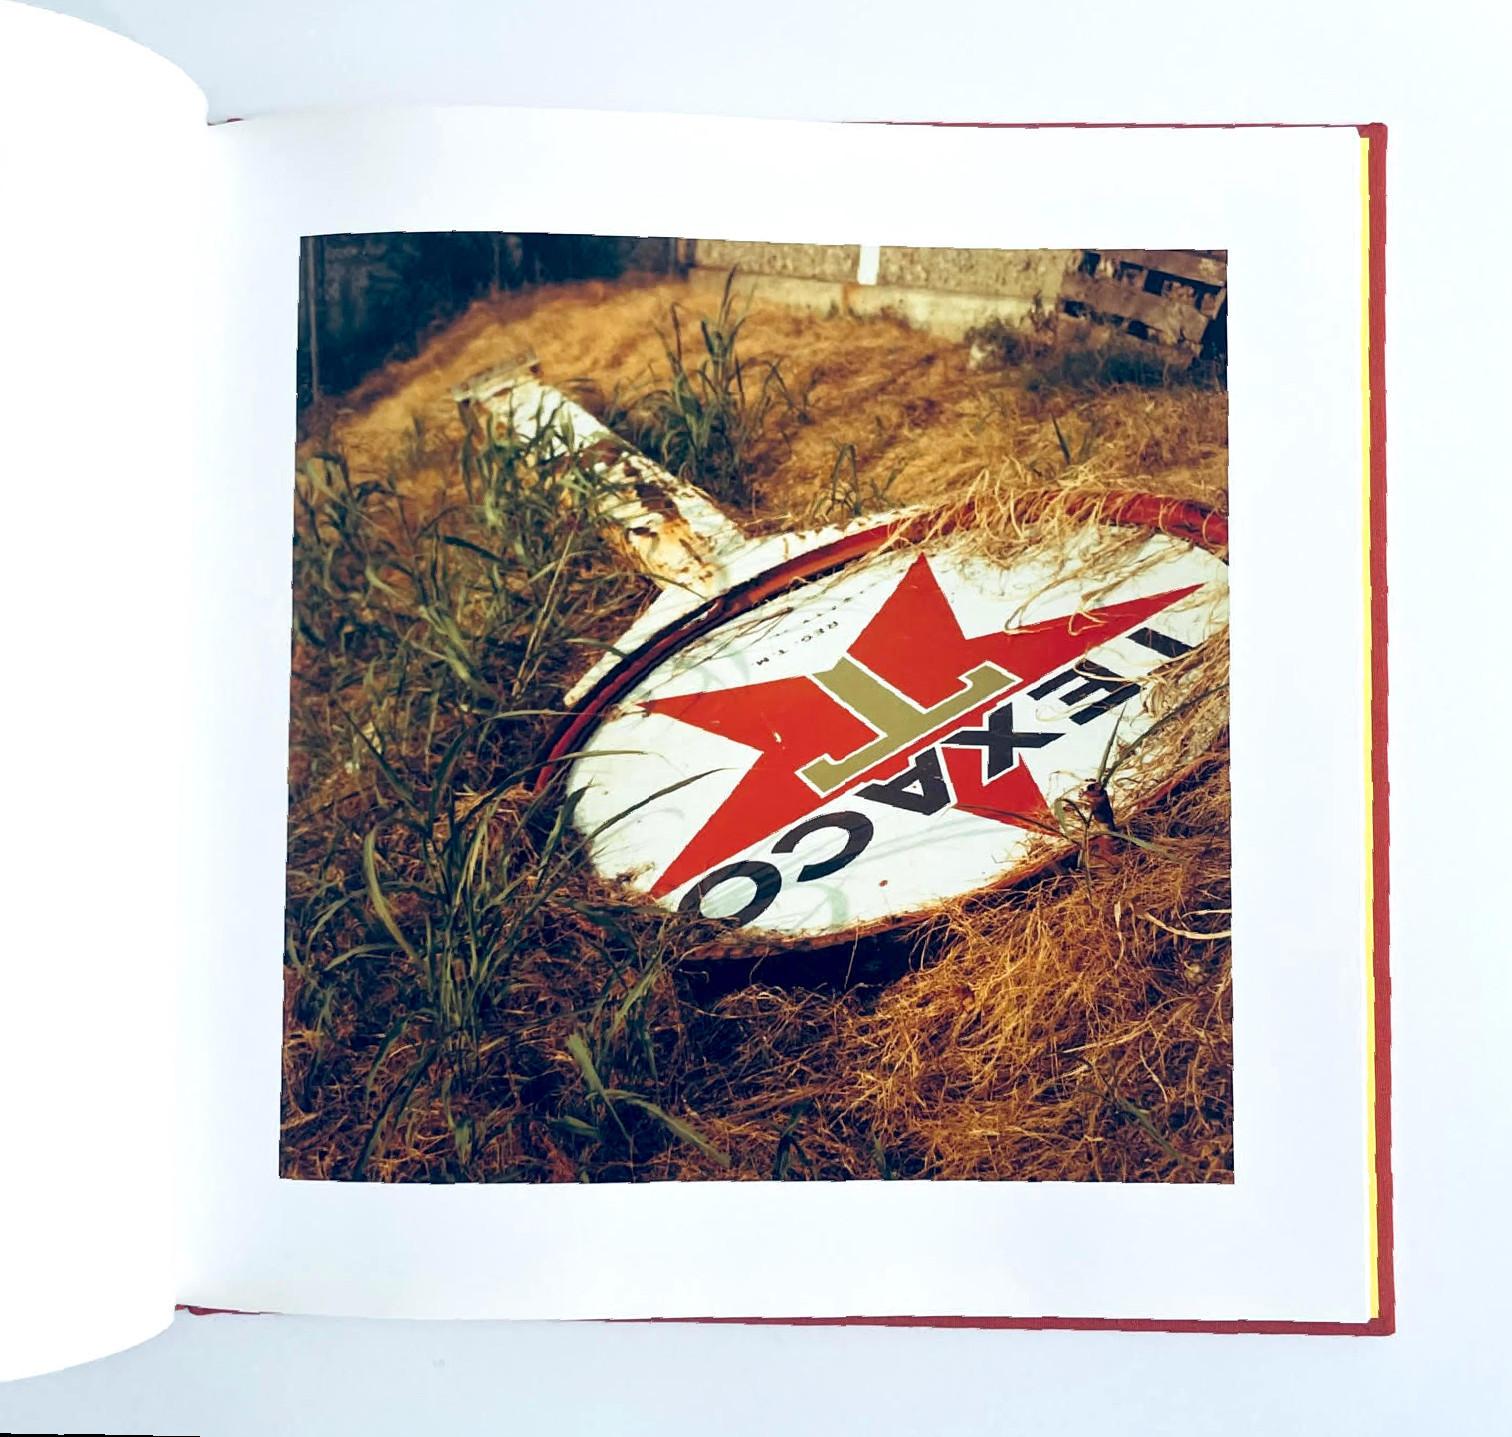 2 1/4 Eggleston (Limited Edition Monograph Hand signed by William Eggleston) For Sale 10